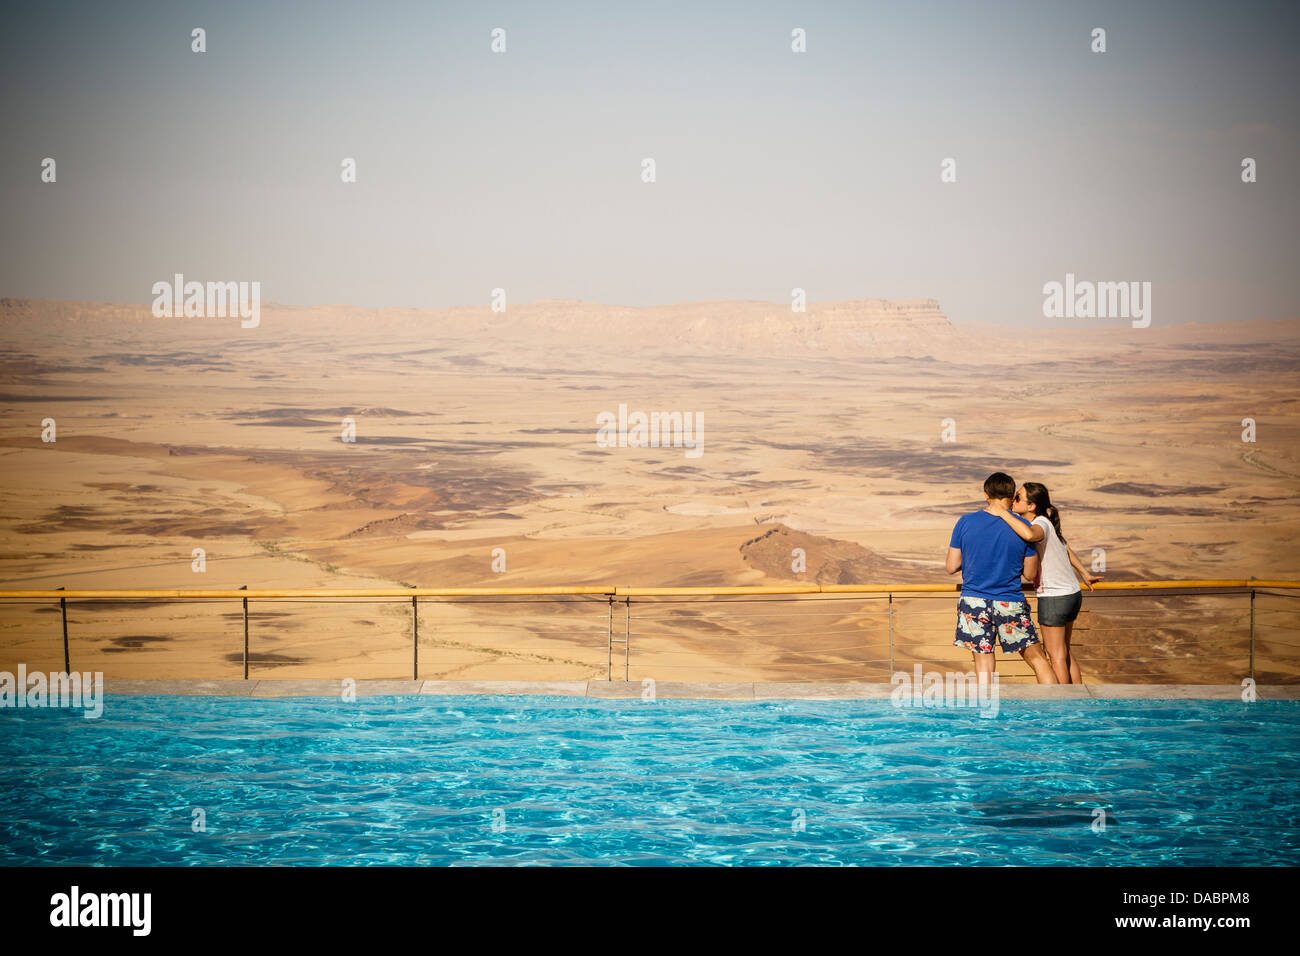 View over the Ramon crater seen from Beresheet hotel, Mitzpe Ramon, Negev region, Israel, Middle East Stock Photo